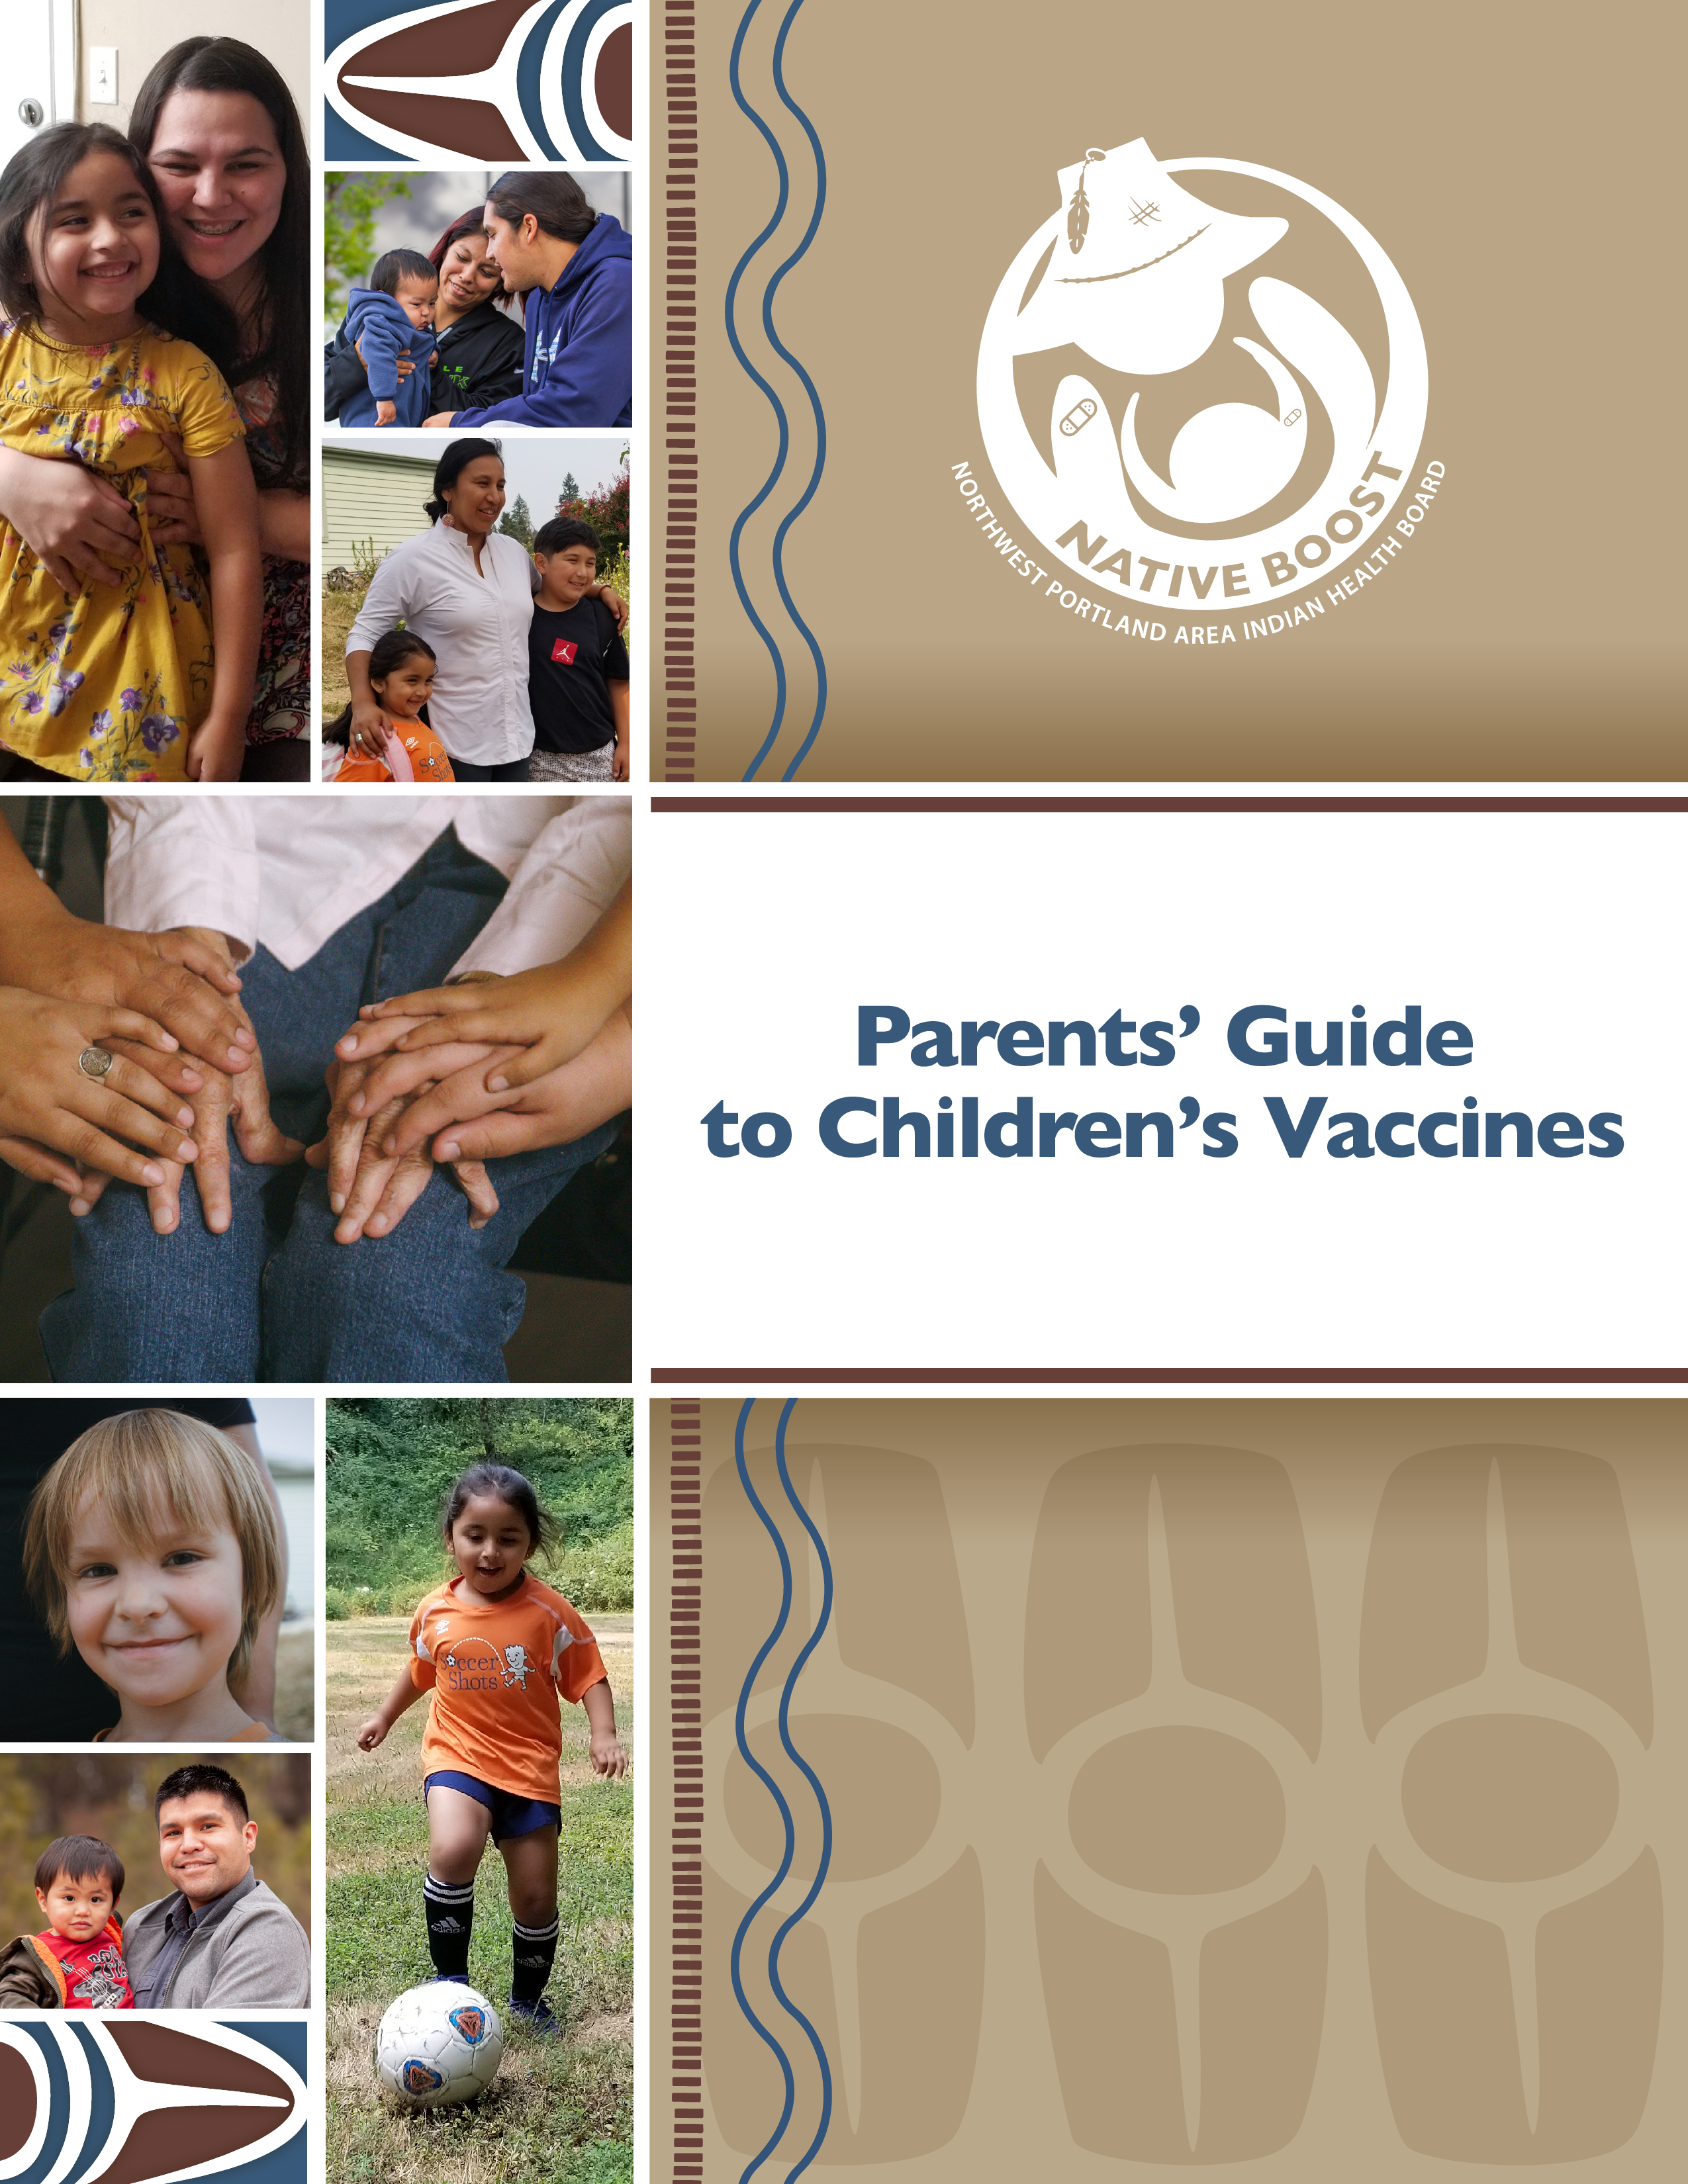 Set of graphics with Native American and Indigenous parents pictured with their young children. Images include holding hands, families smiling, and a young kid playing soccer.